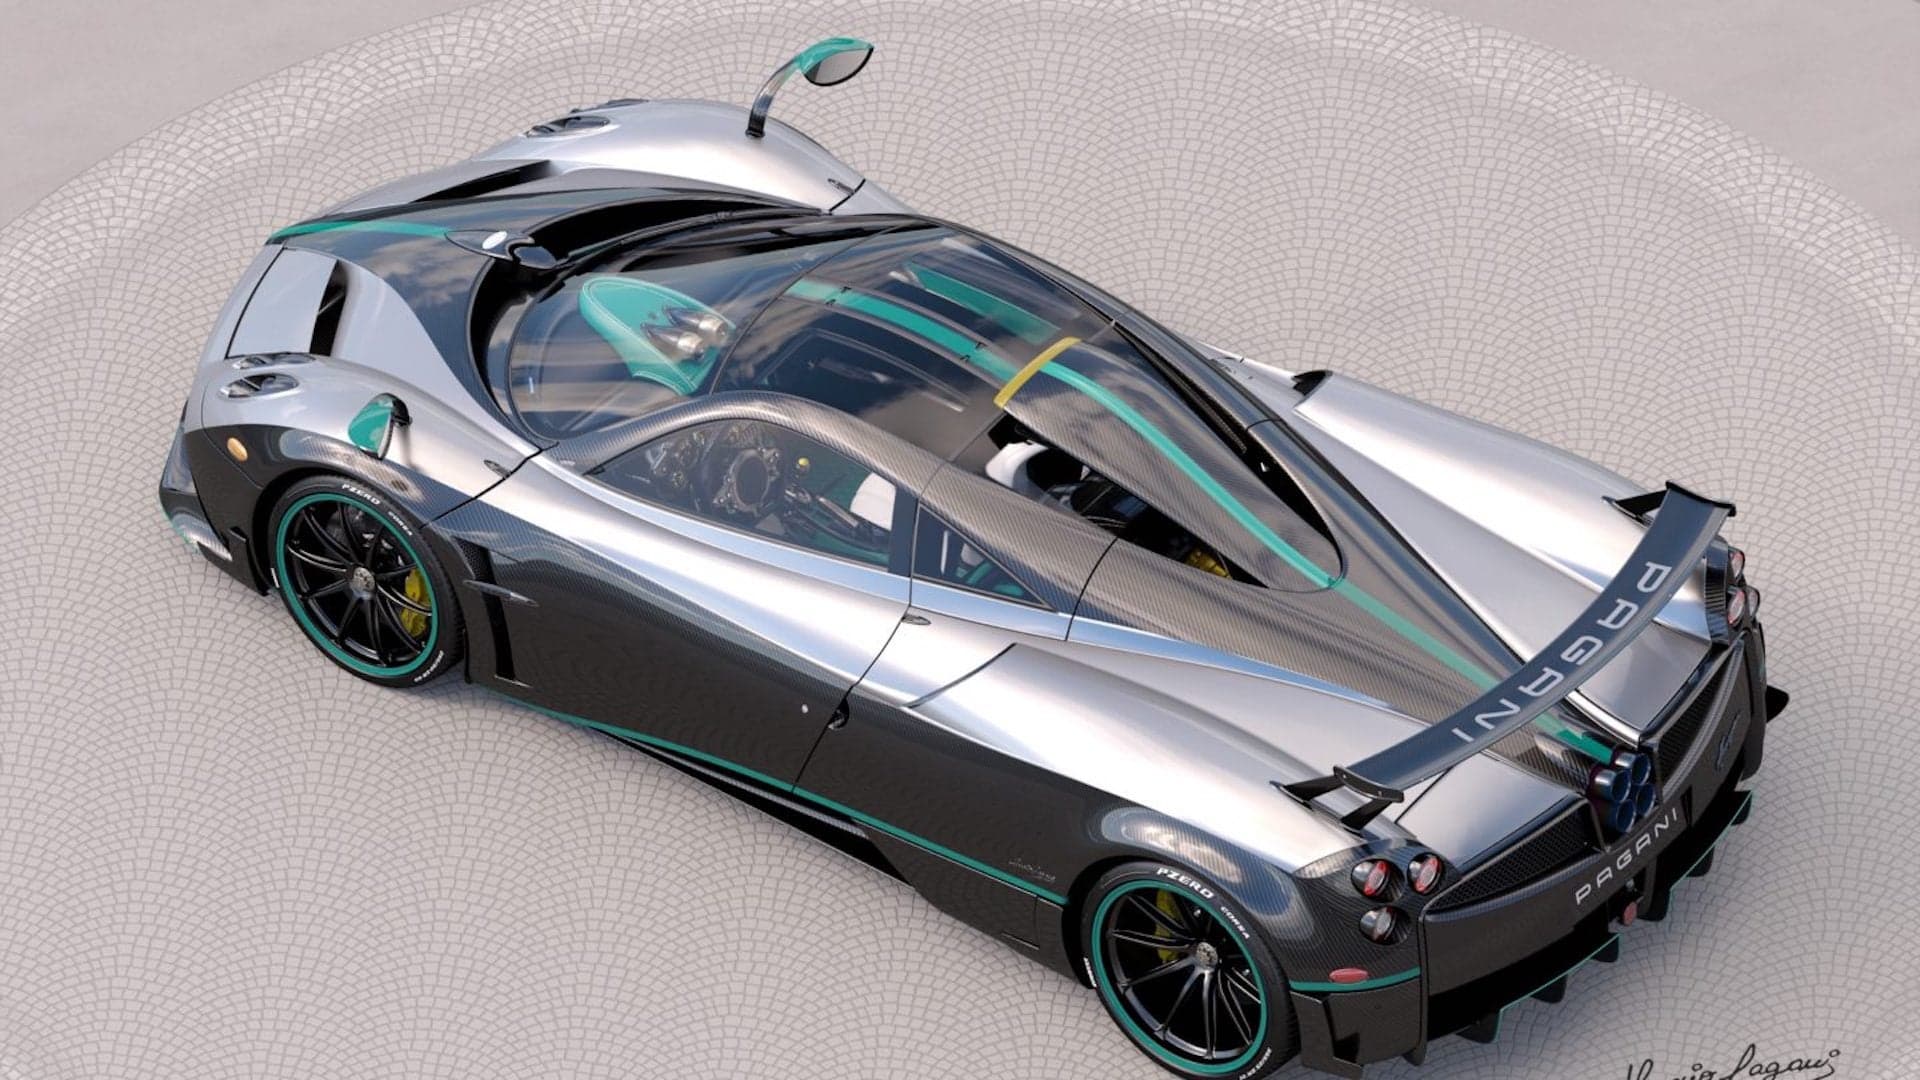 Production-Ending Pagani Huayra Will Sport Mercedes-AMG’s Formula 1 Livery